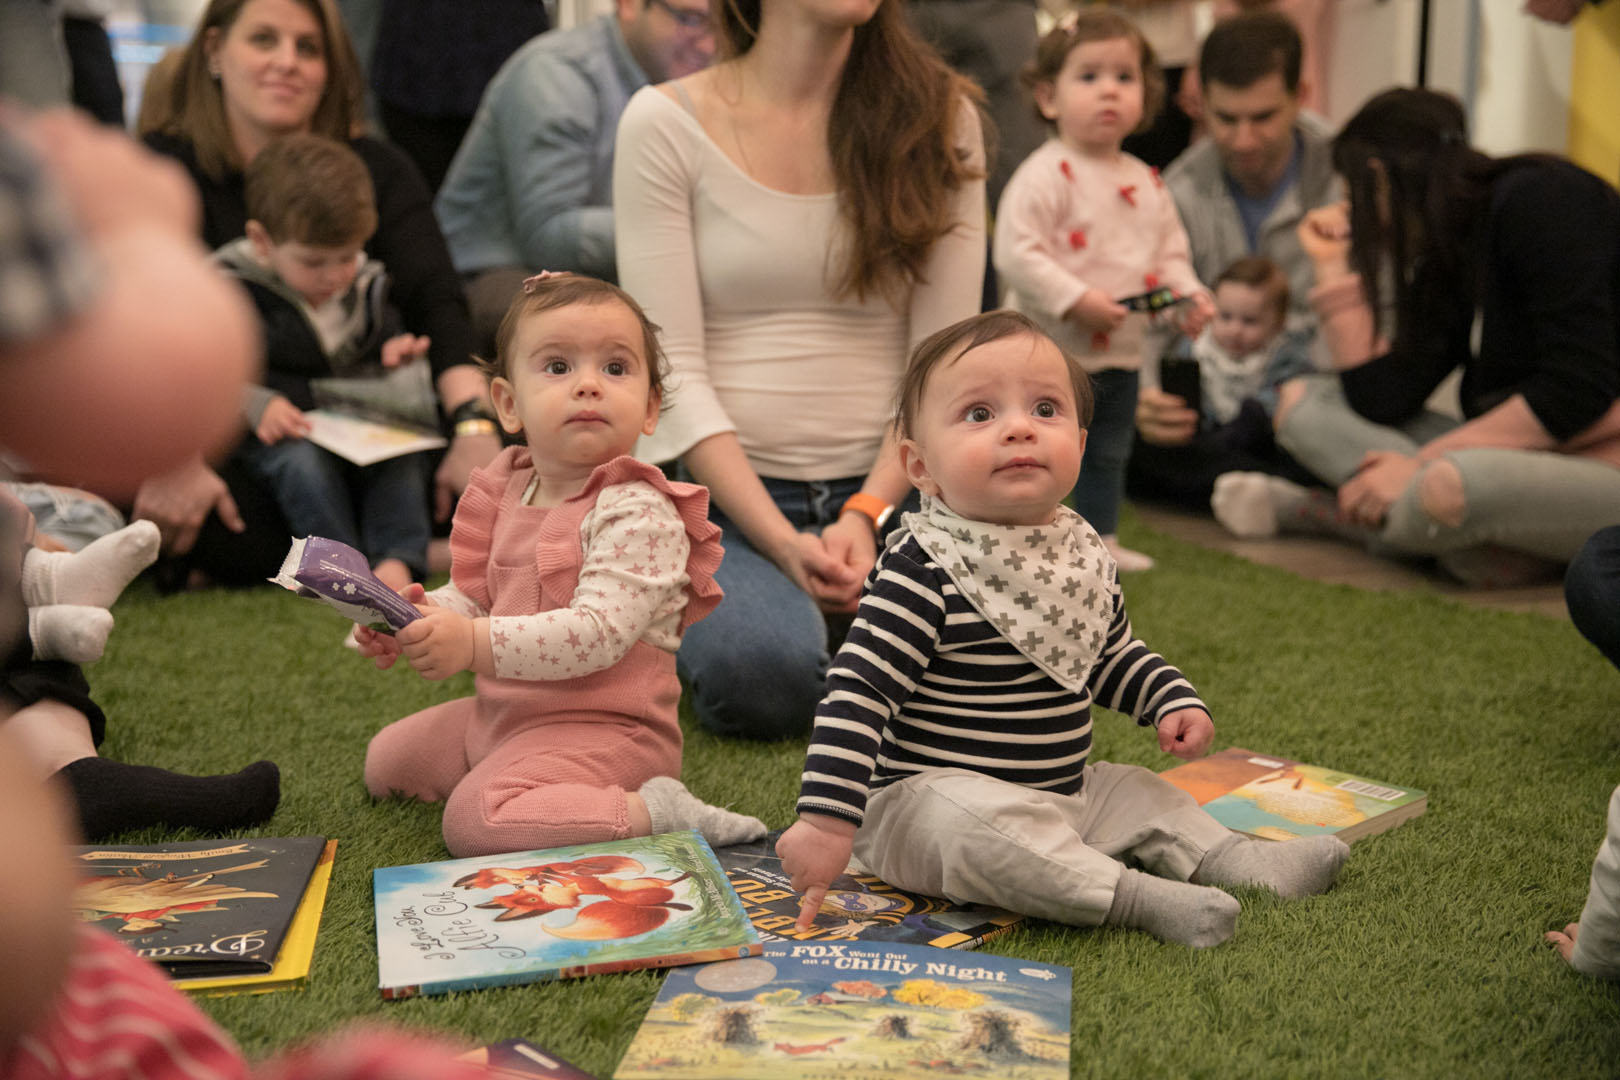 Two toddlers sitting on the floor with books, looking up at a teacher reading to them. Their mothers are sitting behind them.